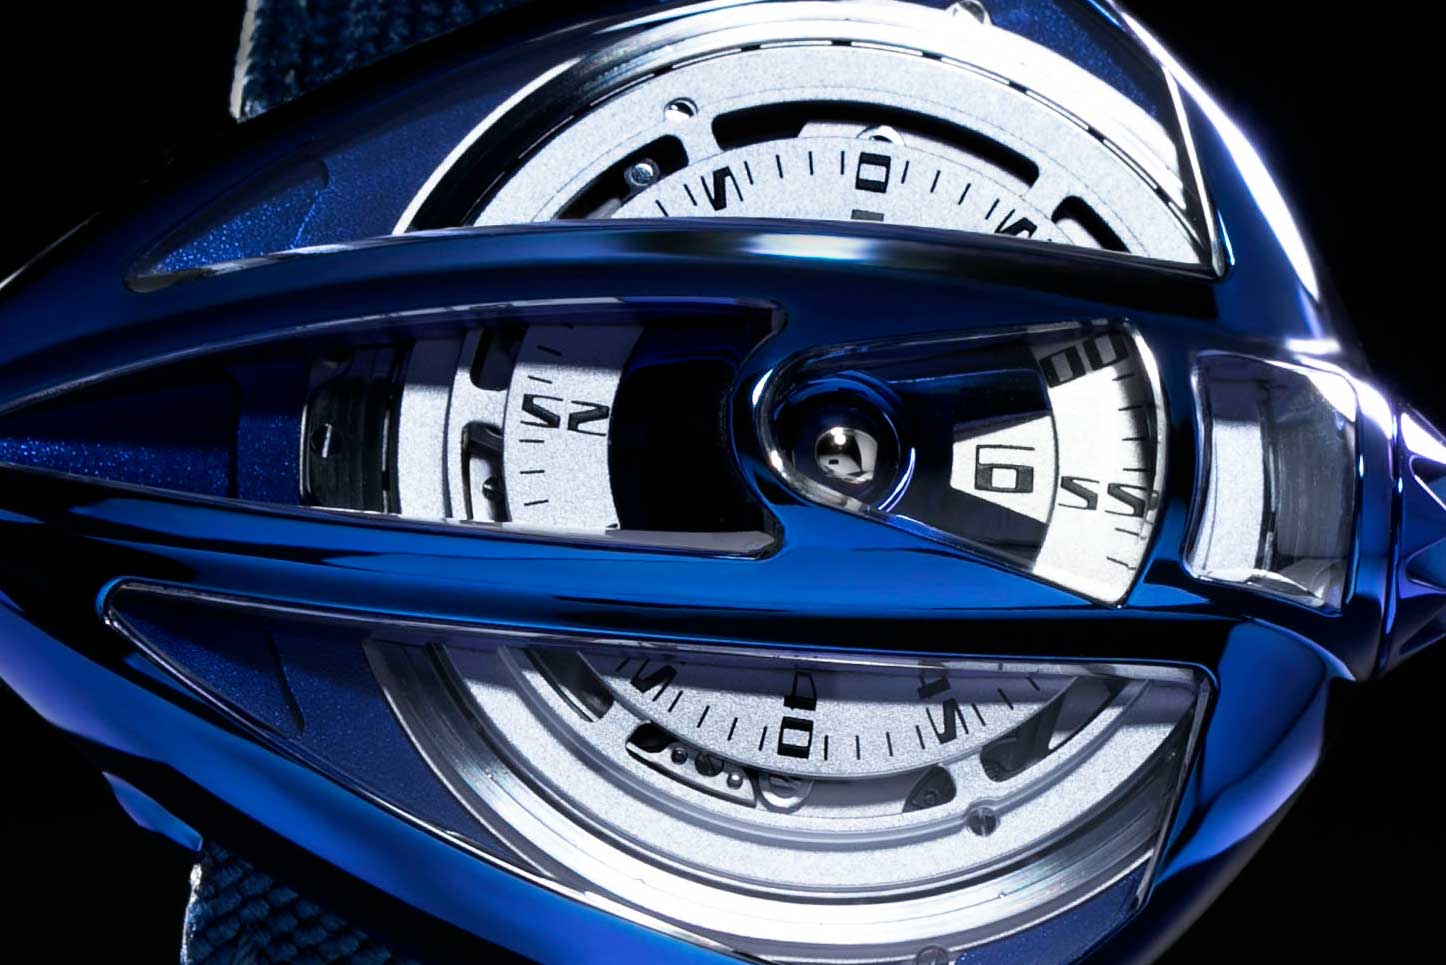 The De Bethune Dream Watch 5 Tourbillon ‘Season 1’: A 10-piece limited edition presented by De Bethune with the collaboration of its friend and fine watchmaking connoisseur Swizz Beatz.